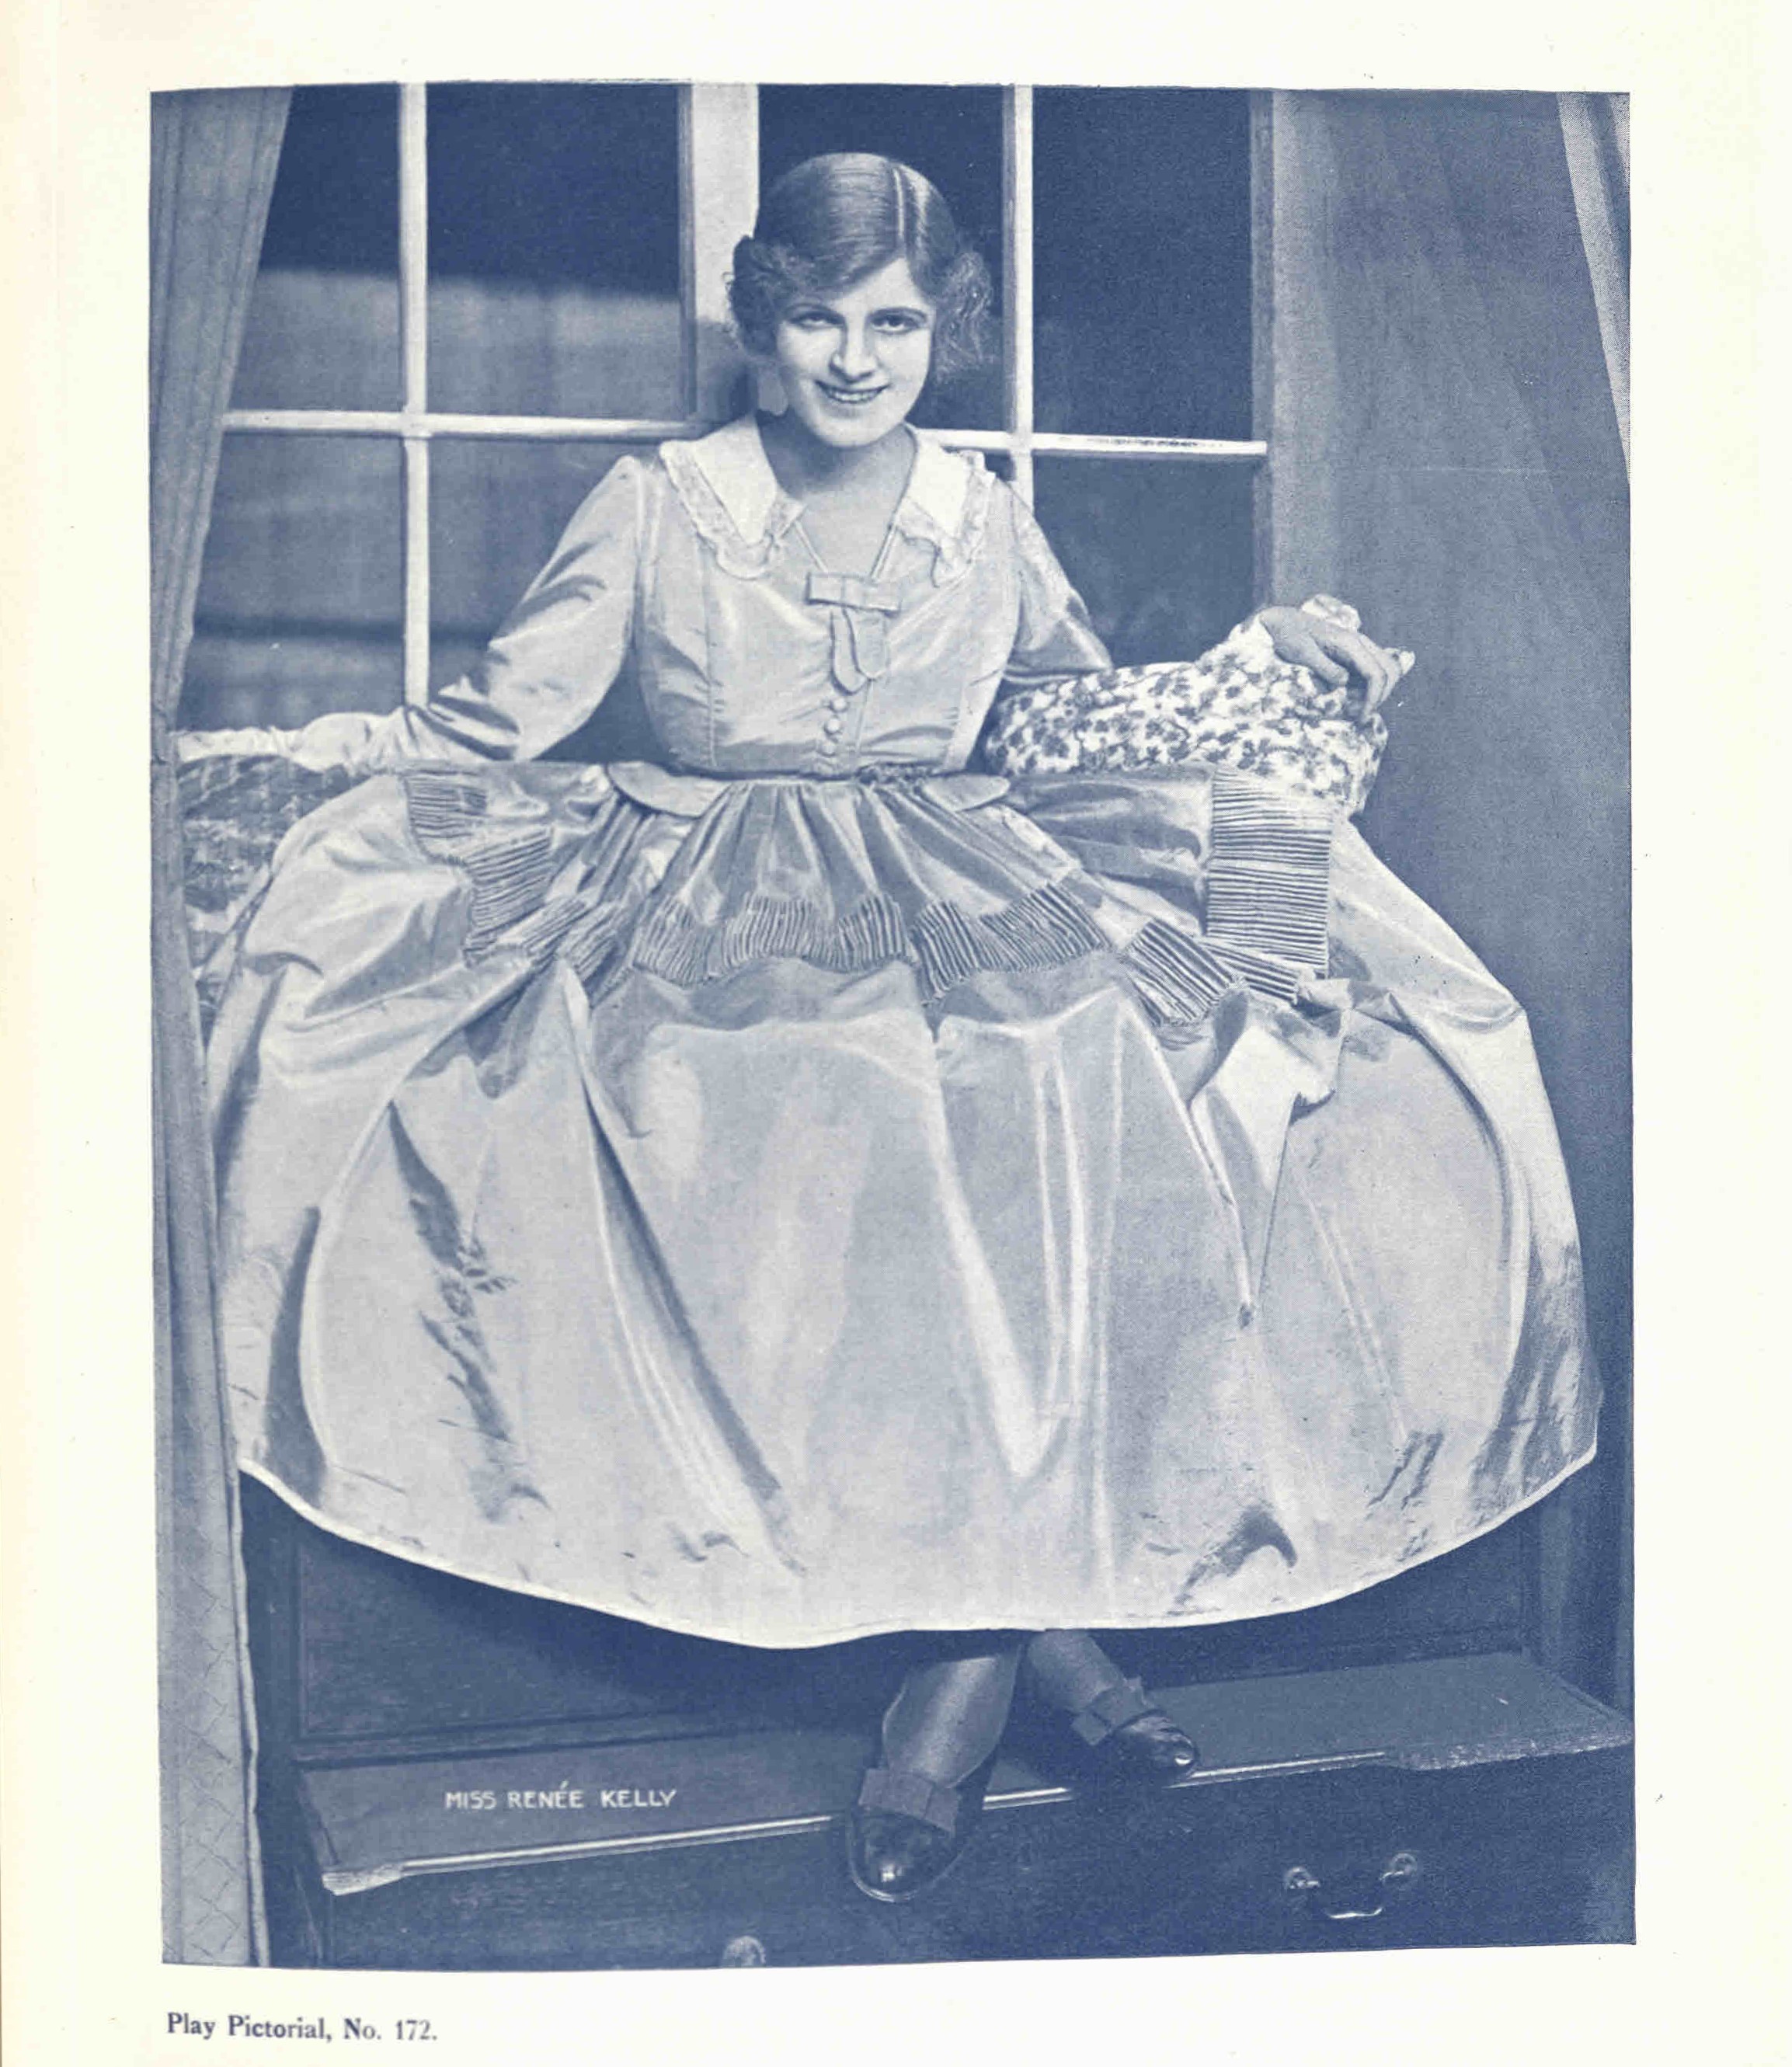 Renee Kelly in the Play Pictorial for Daddy Long Legs